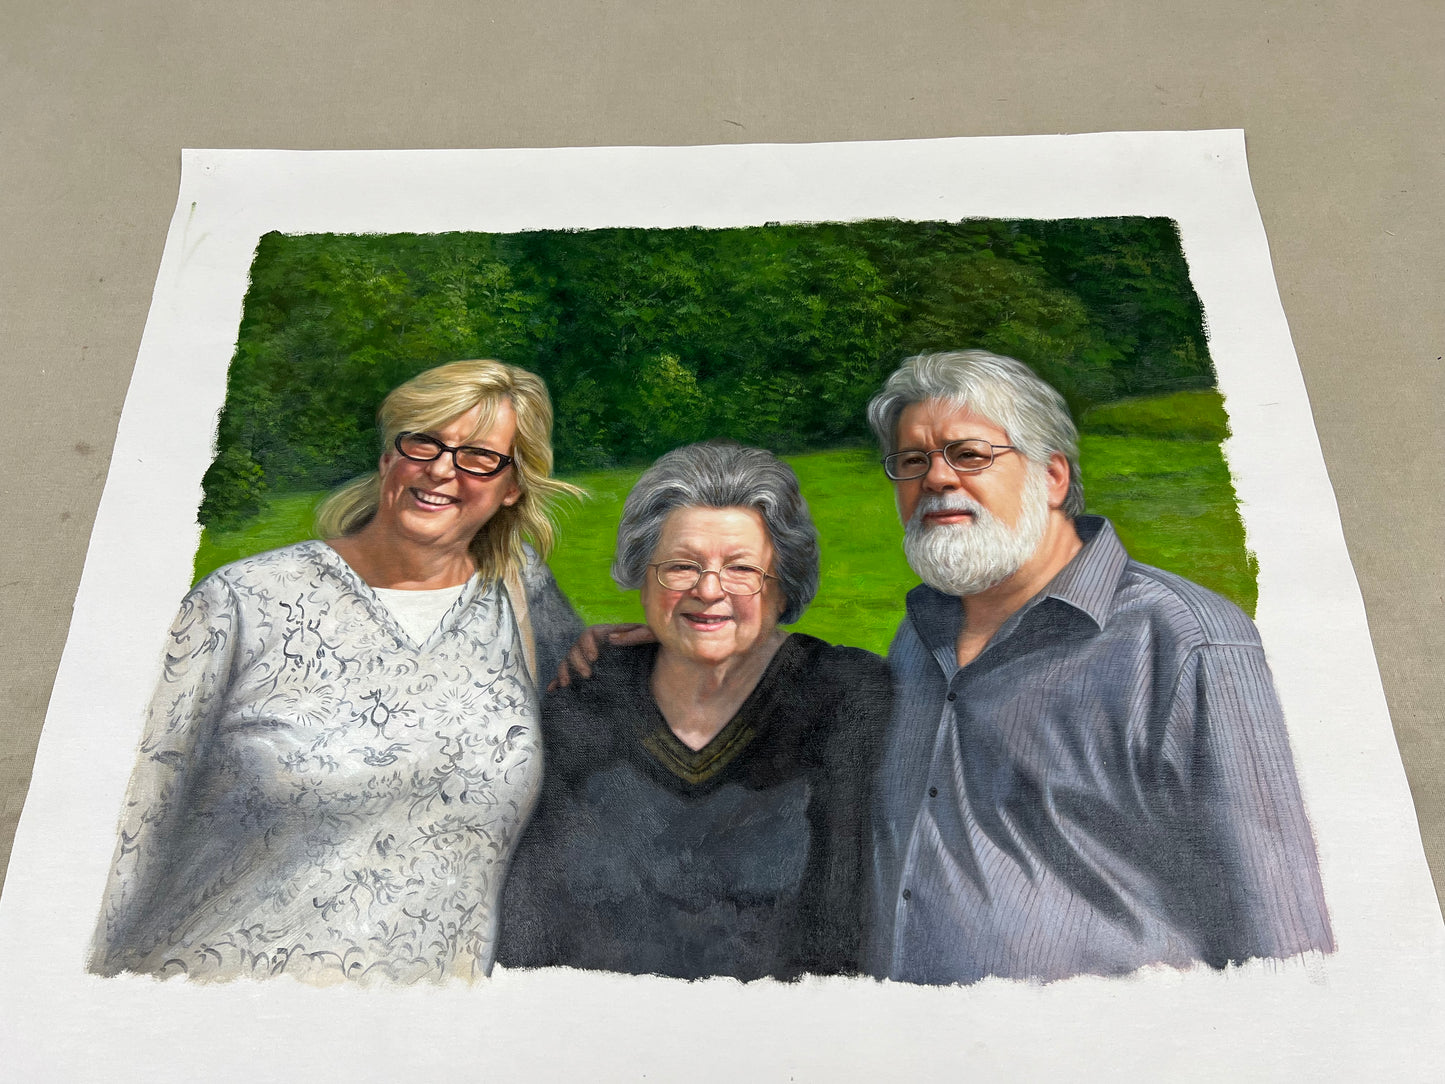 Custom oil painting portraits from photos, commissioned portraits on canvas, custom oil paintings from photos, commission art, gifts for family and friends